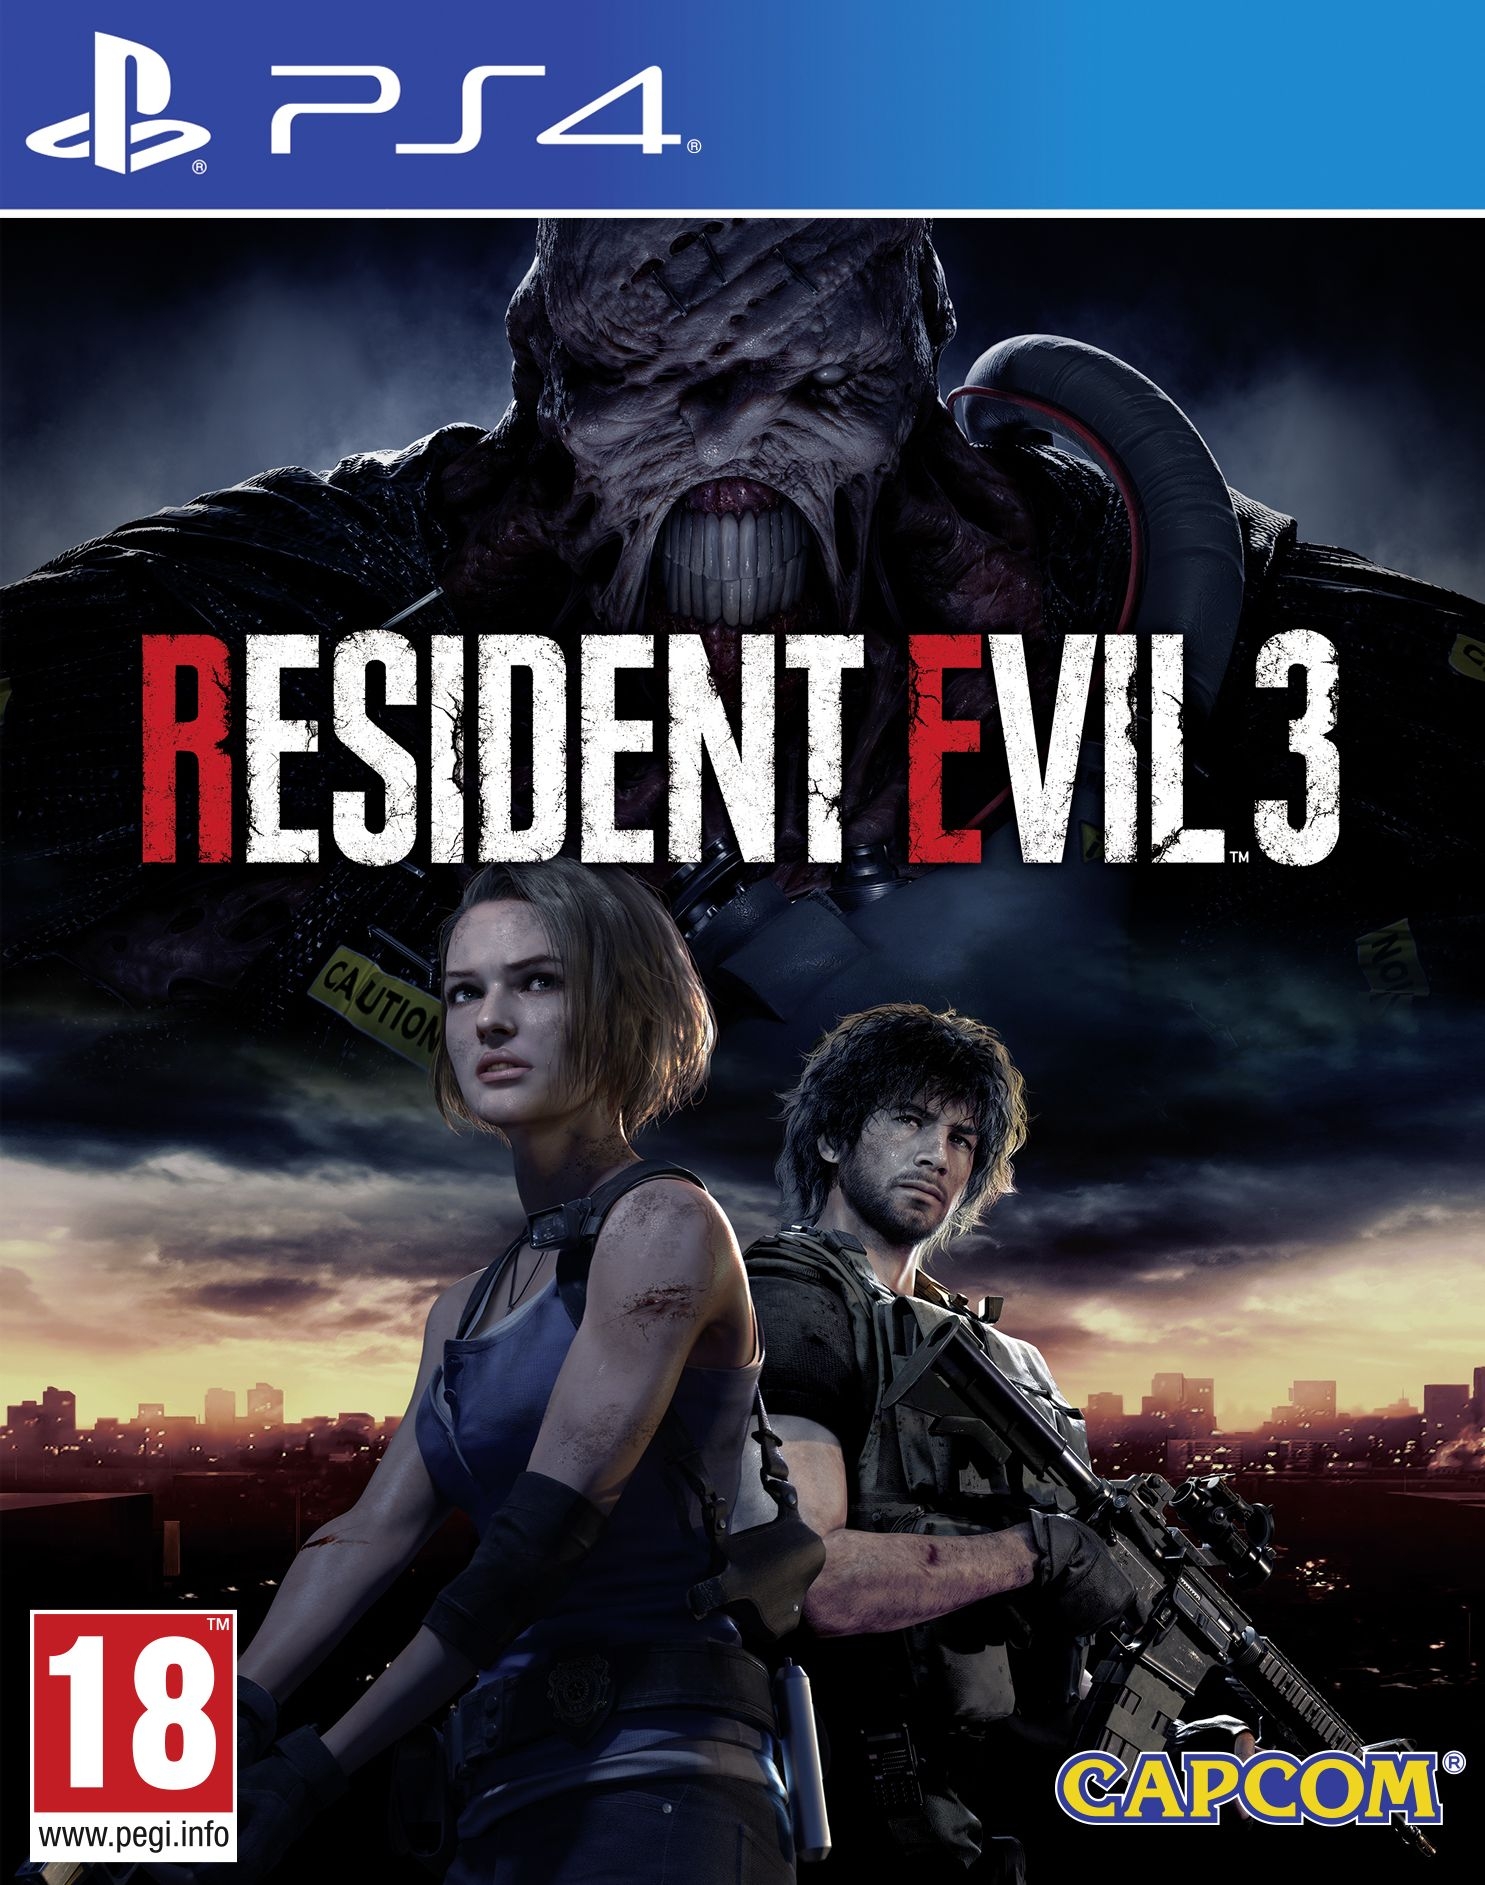 PS4 Resident Evil 3 Collectors Edition